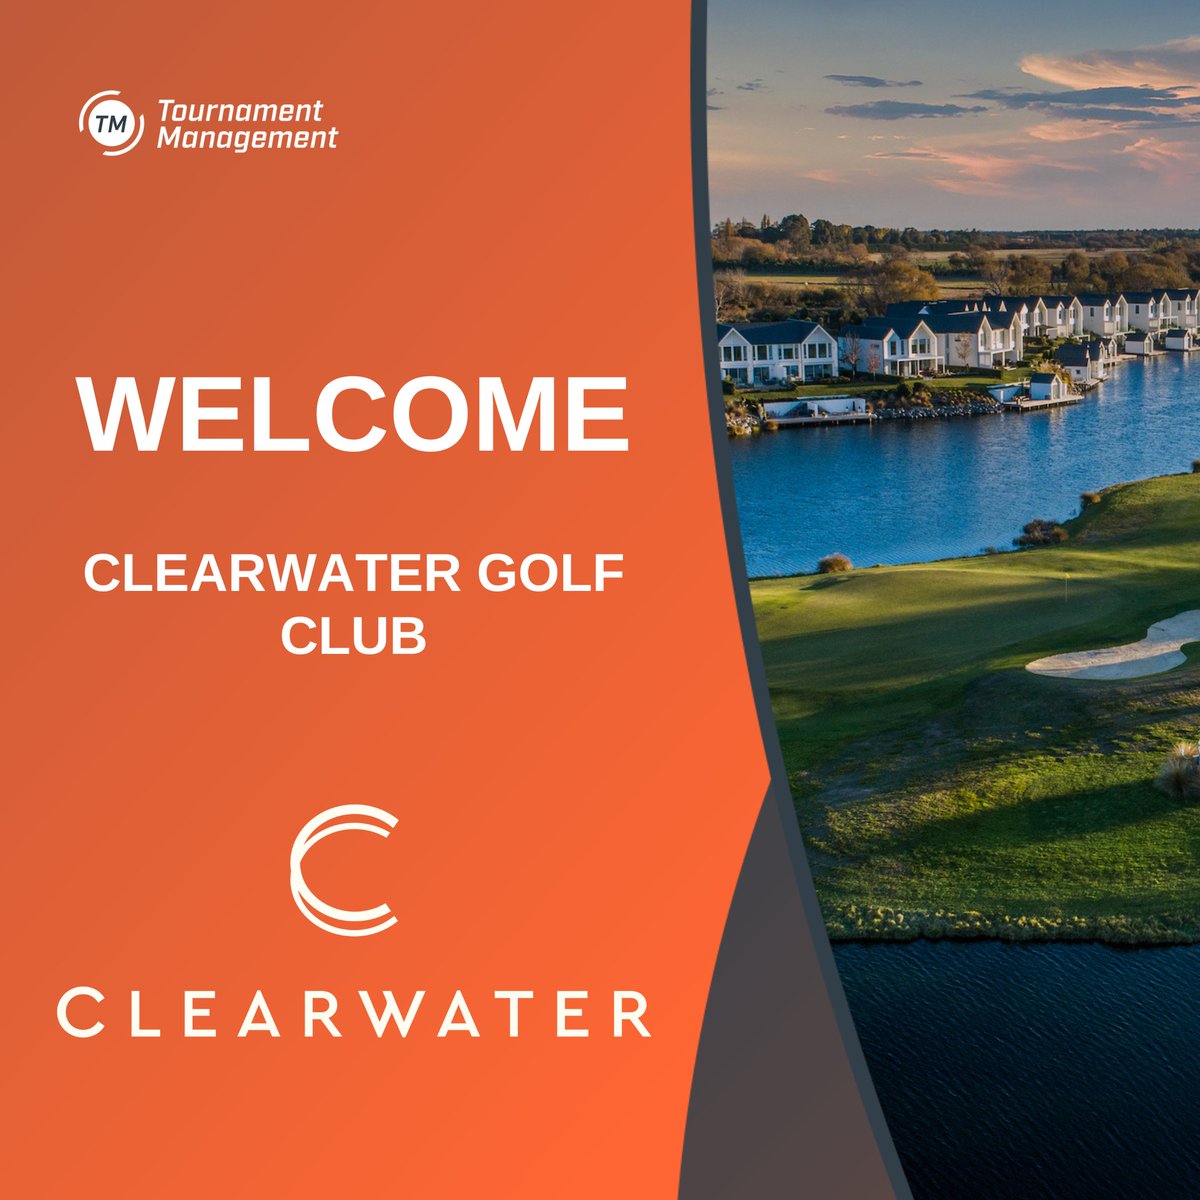 We are excited to welcome Clearwater Golf Club to the GG Family!

🏌️‍♂️ Thrilled to have another top-notch New Zealand golf destination on board. Let's tee up some amazing experiences together! ⛳ 

#NewBeginnings #ClearwaterGolfClub #Innovation #GolfEvent